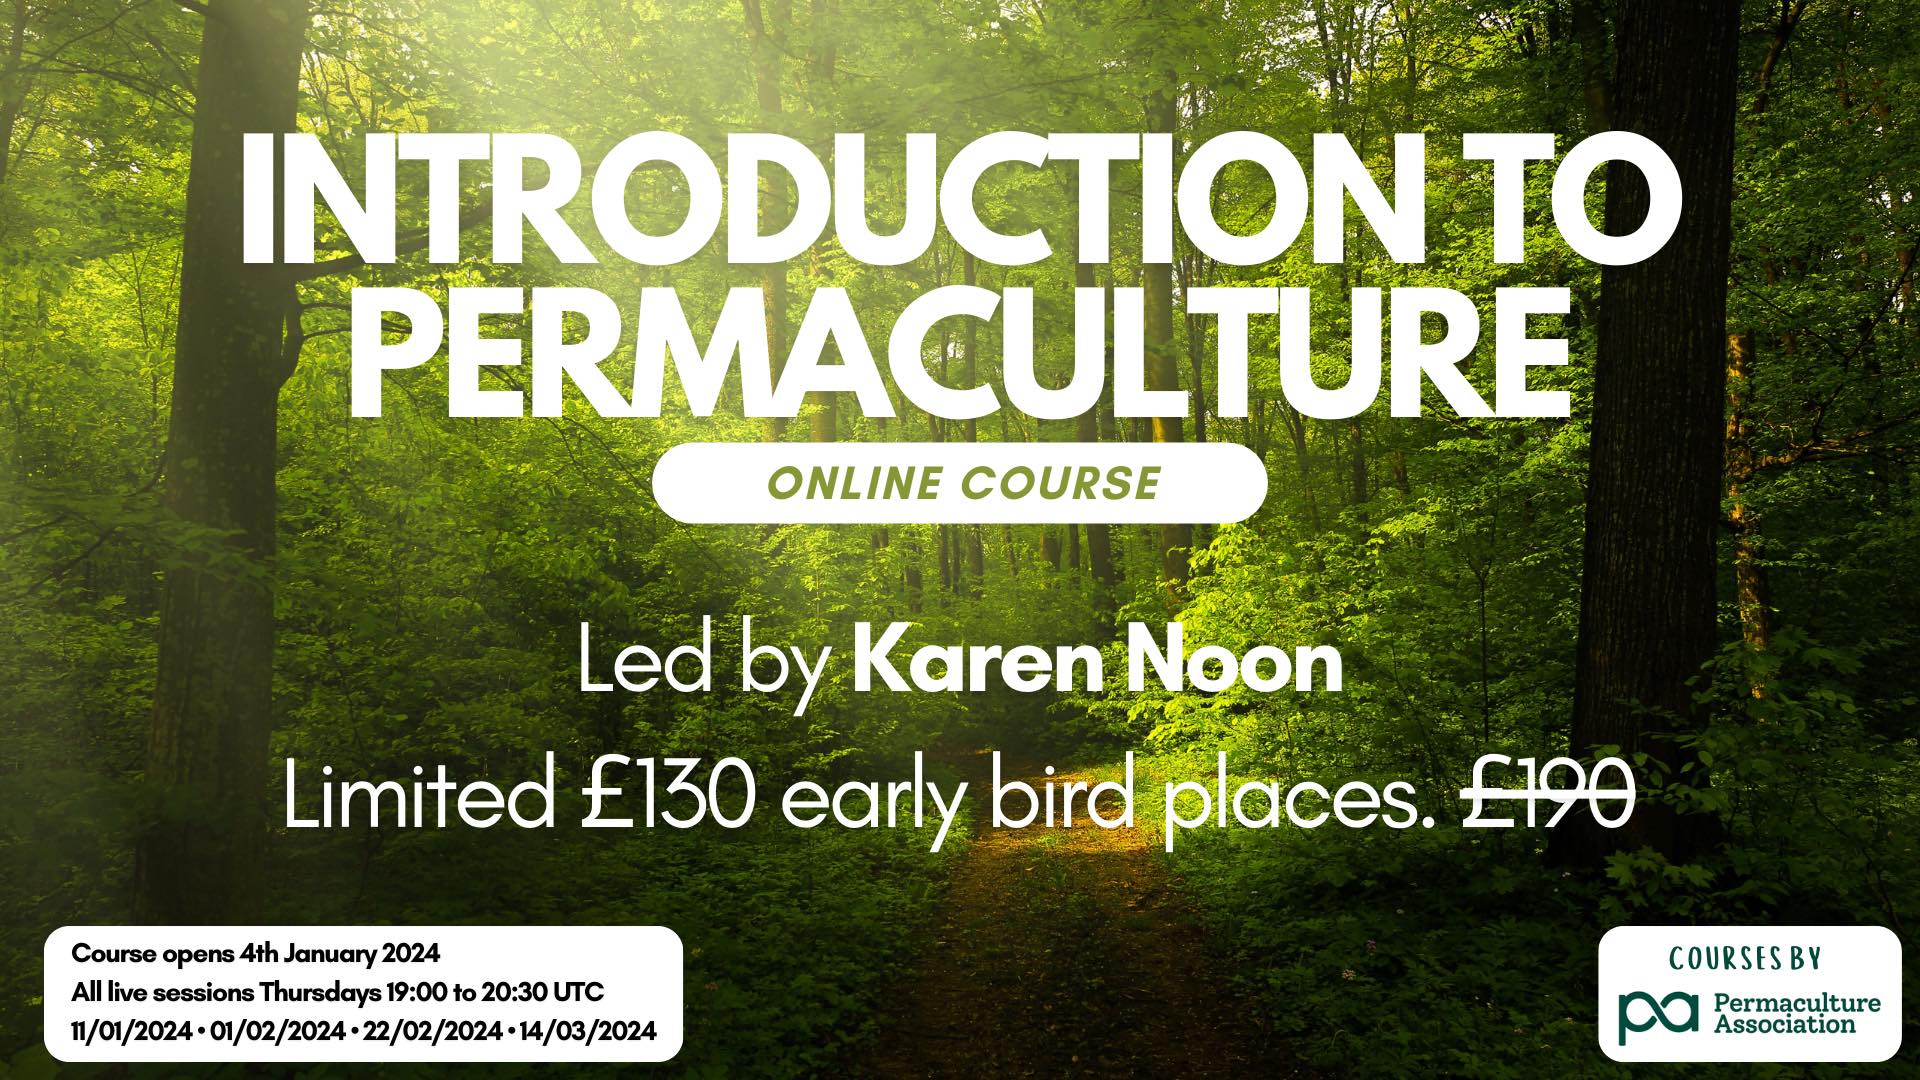 Introduction to Permaculture with Karen Noon